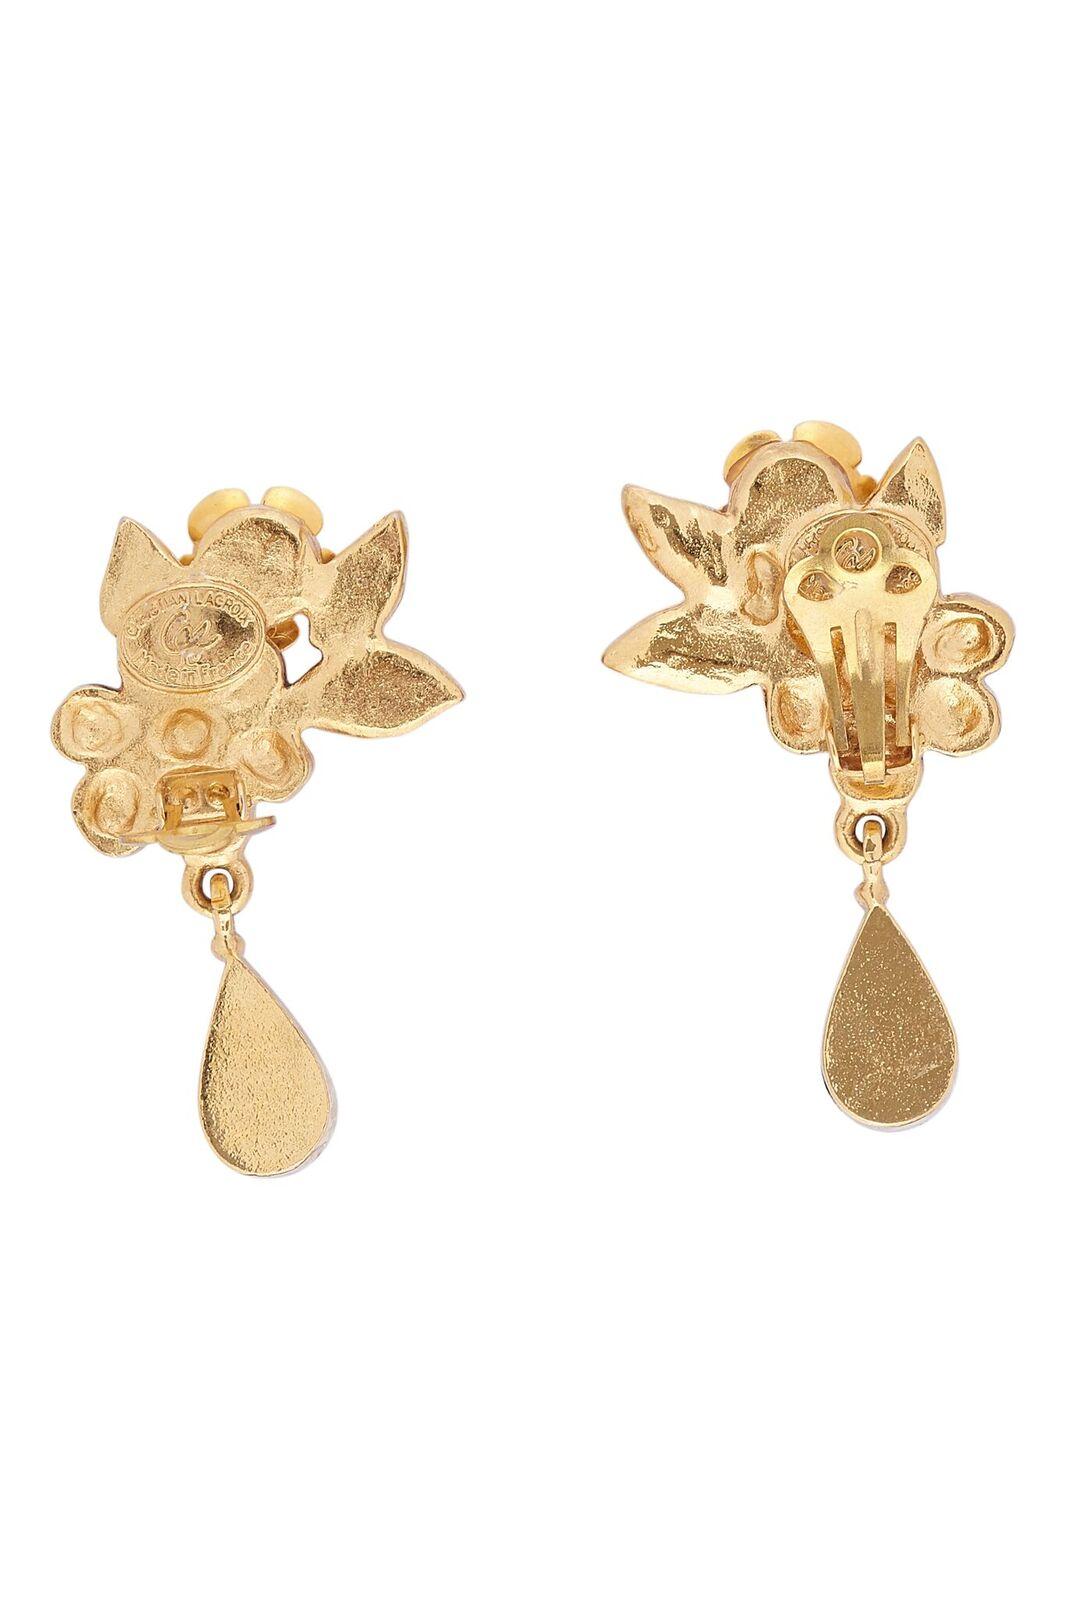 These decadent 1990s Christian Lacroix gold tone crystal drop earrings perfectly encapsulate the spirit of this celebrated designer. The delicately fashioned rose design in contrasting metallic tones are simultaneously elegant and vivacious. The